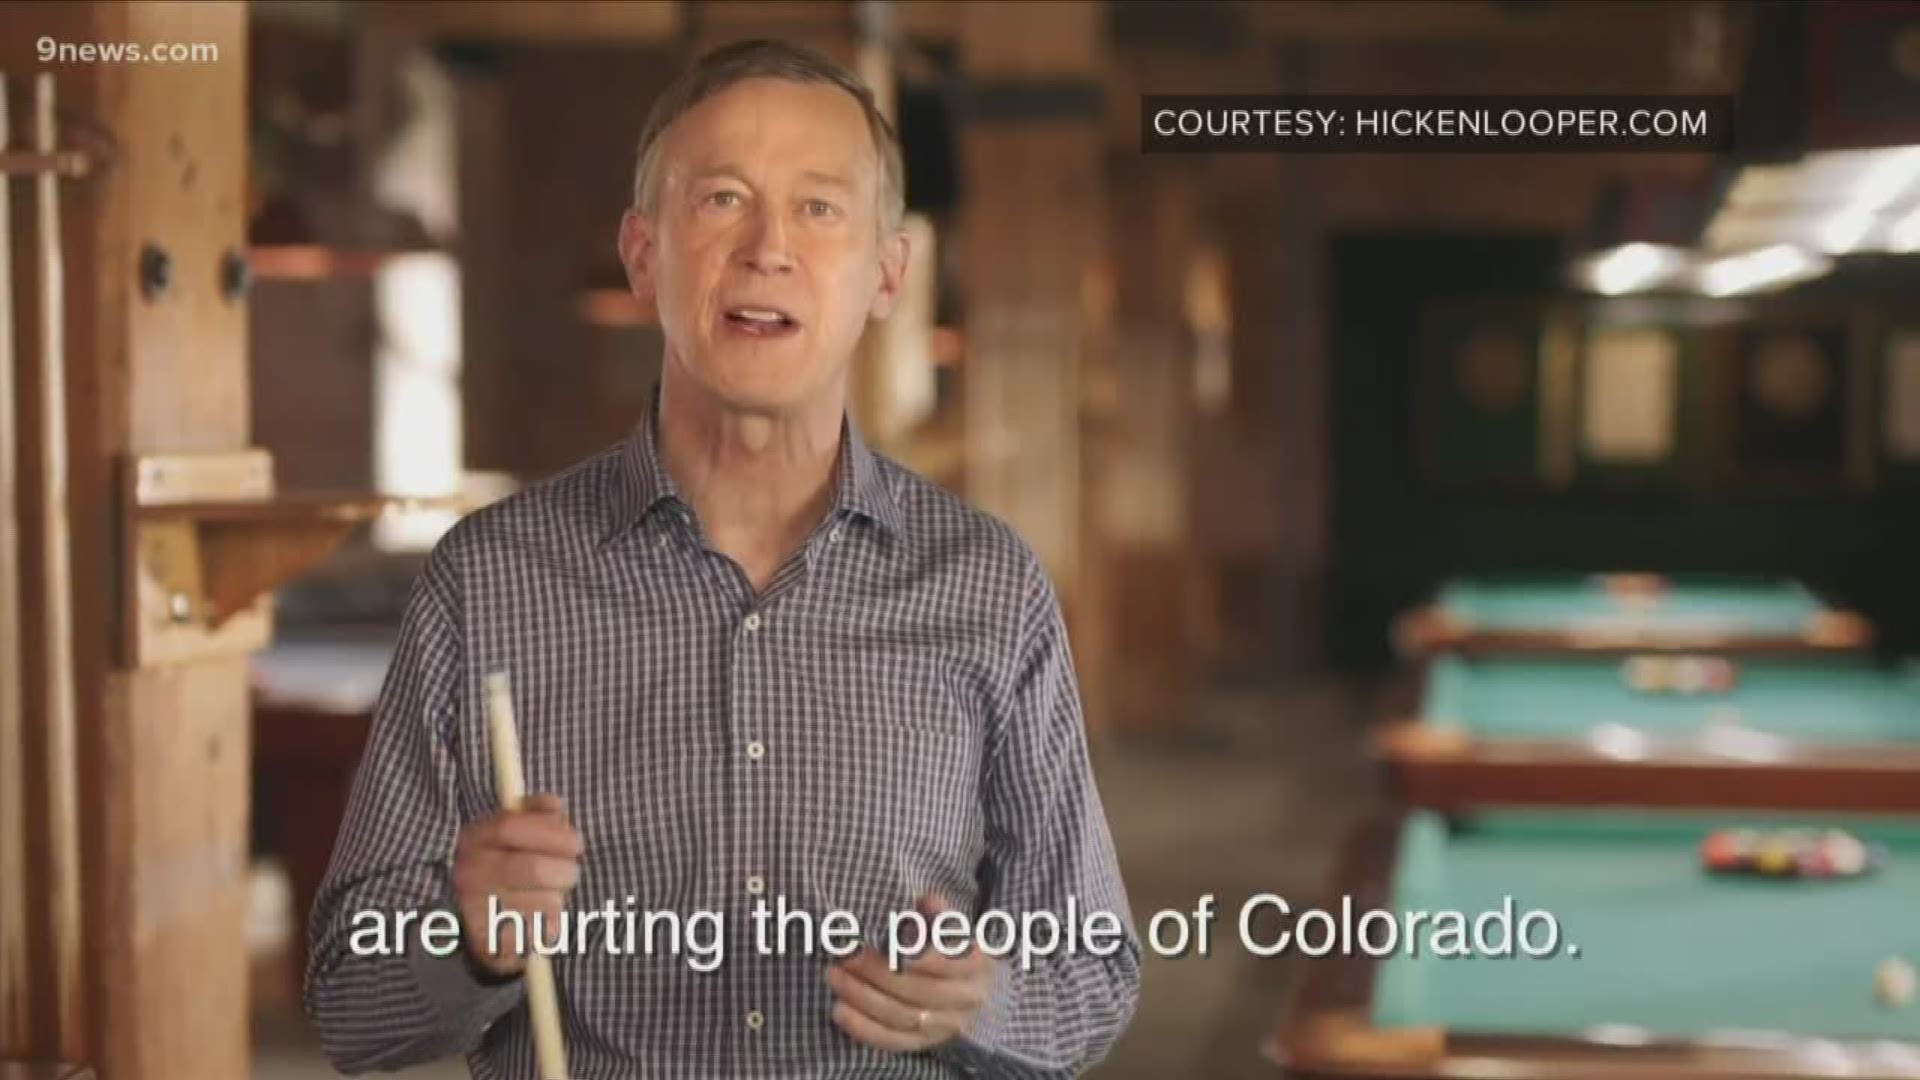 Former Colorado Governor John Hickenlooper announced plans to challenge Cory Gardner in 2020 shortly after ending his presidential campaign.